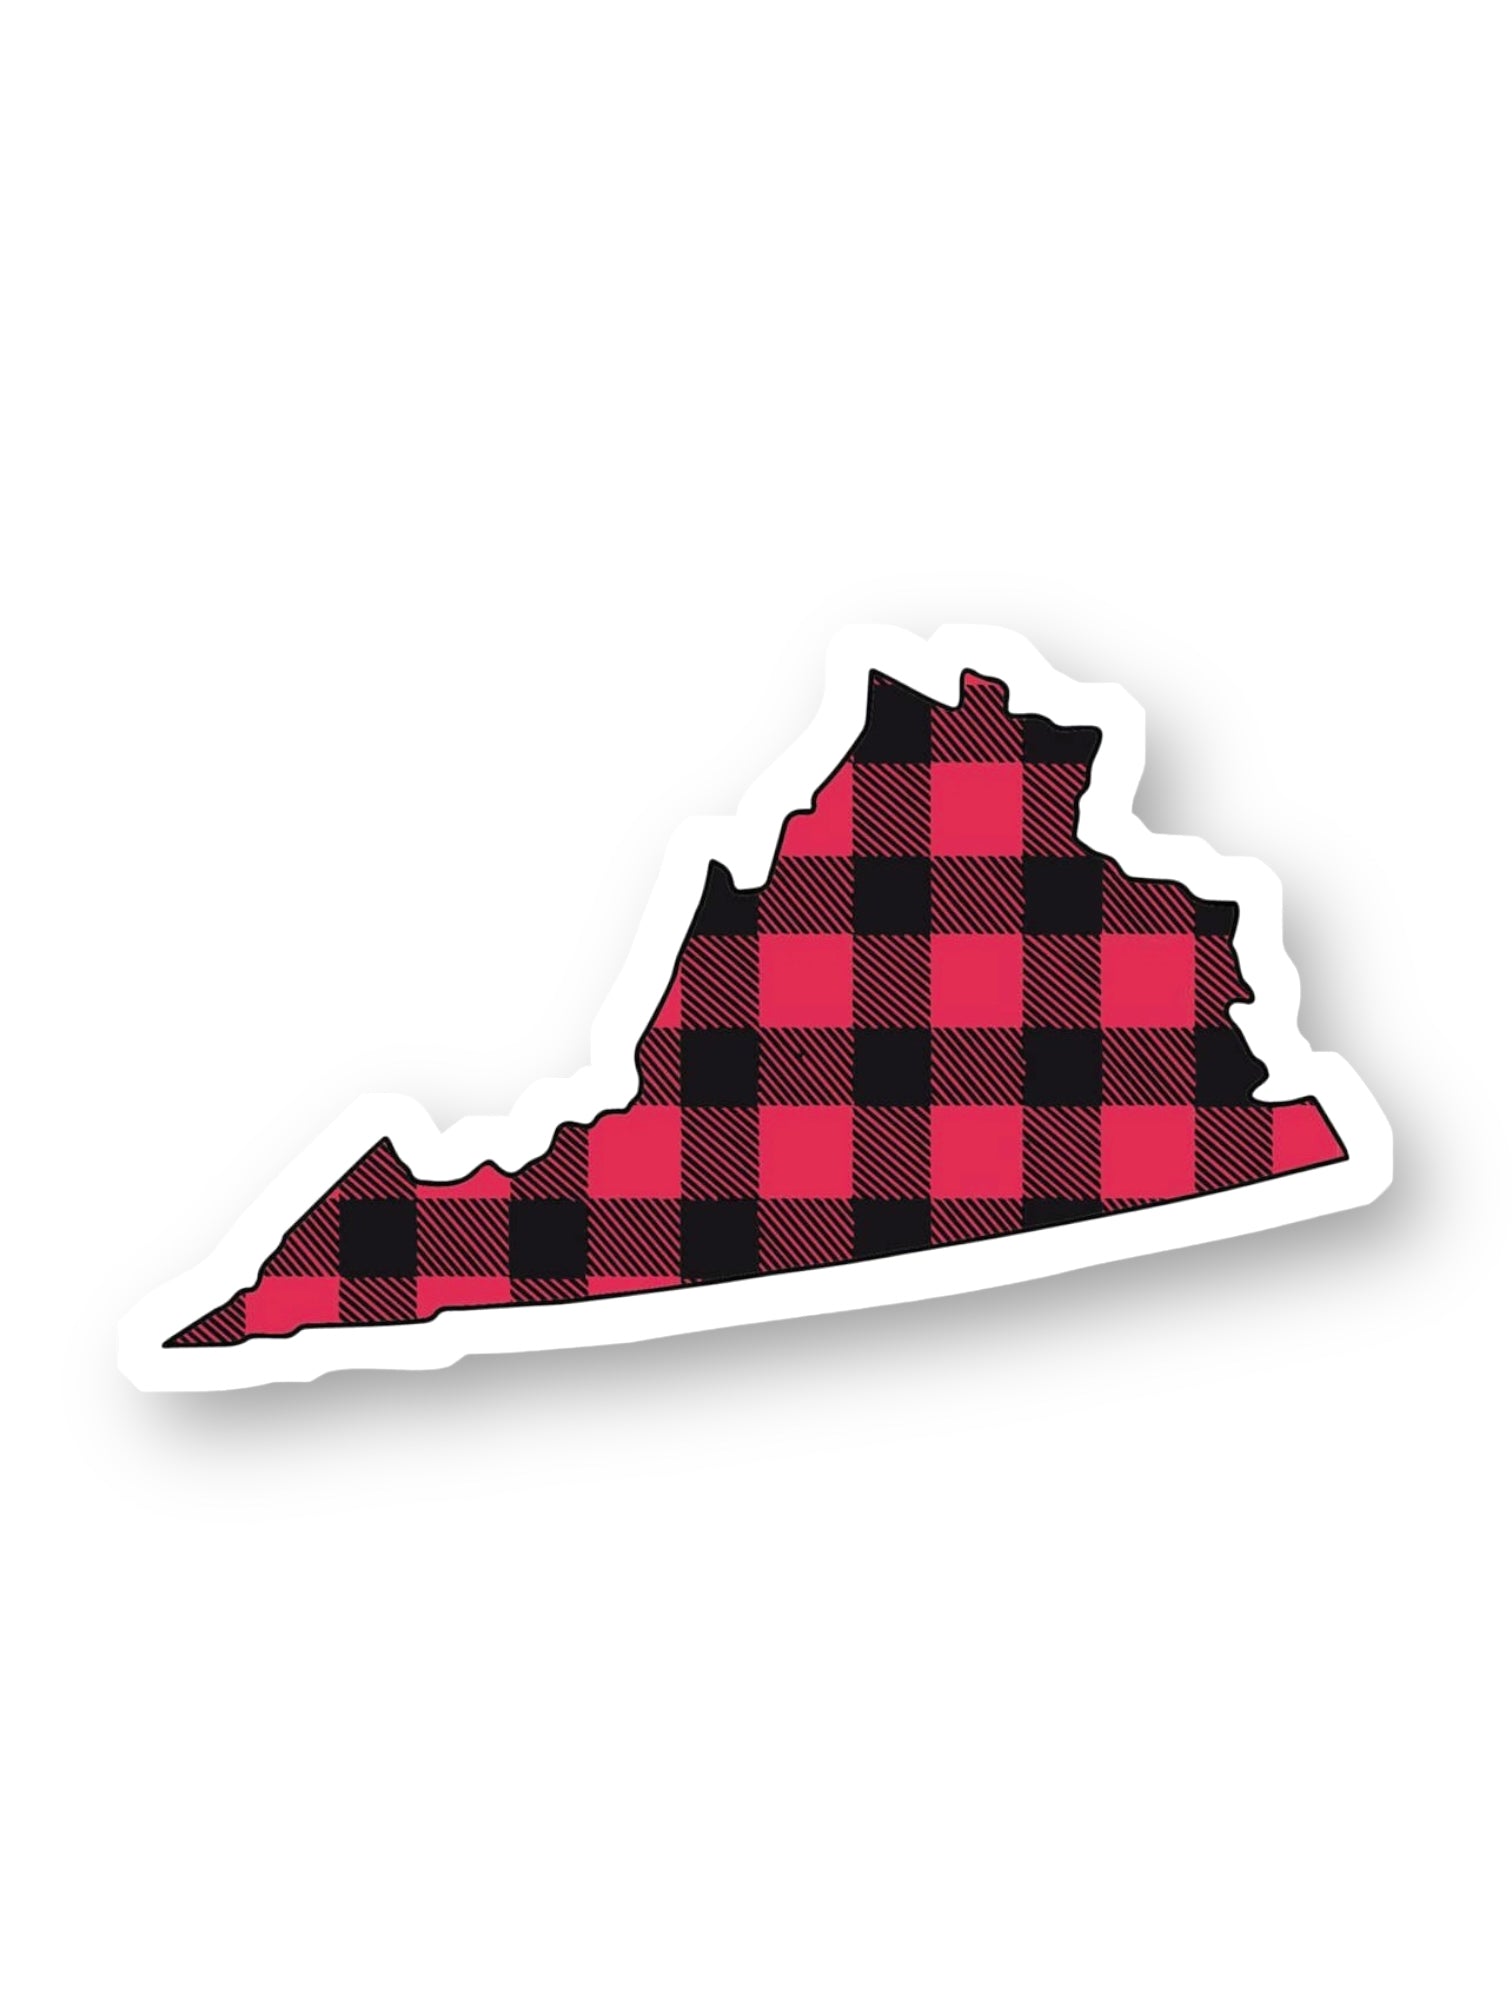 Buffalo Plaid, Flannel VA State Sticker by Big Moods, Sold by Le Monkey House